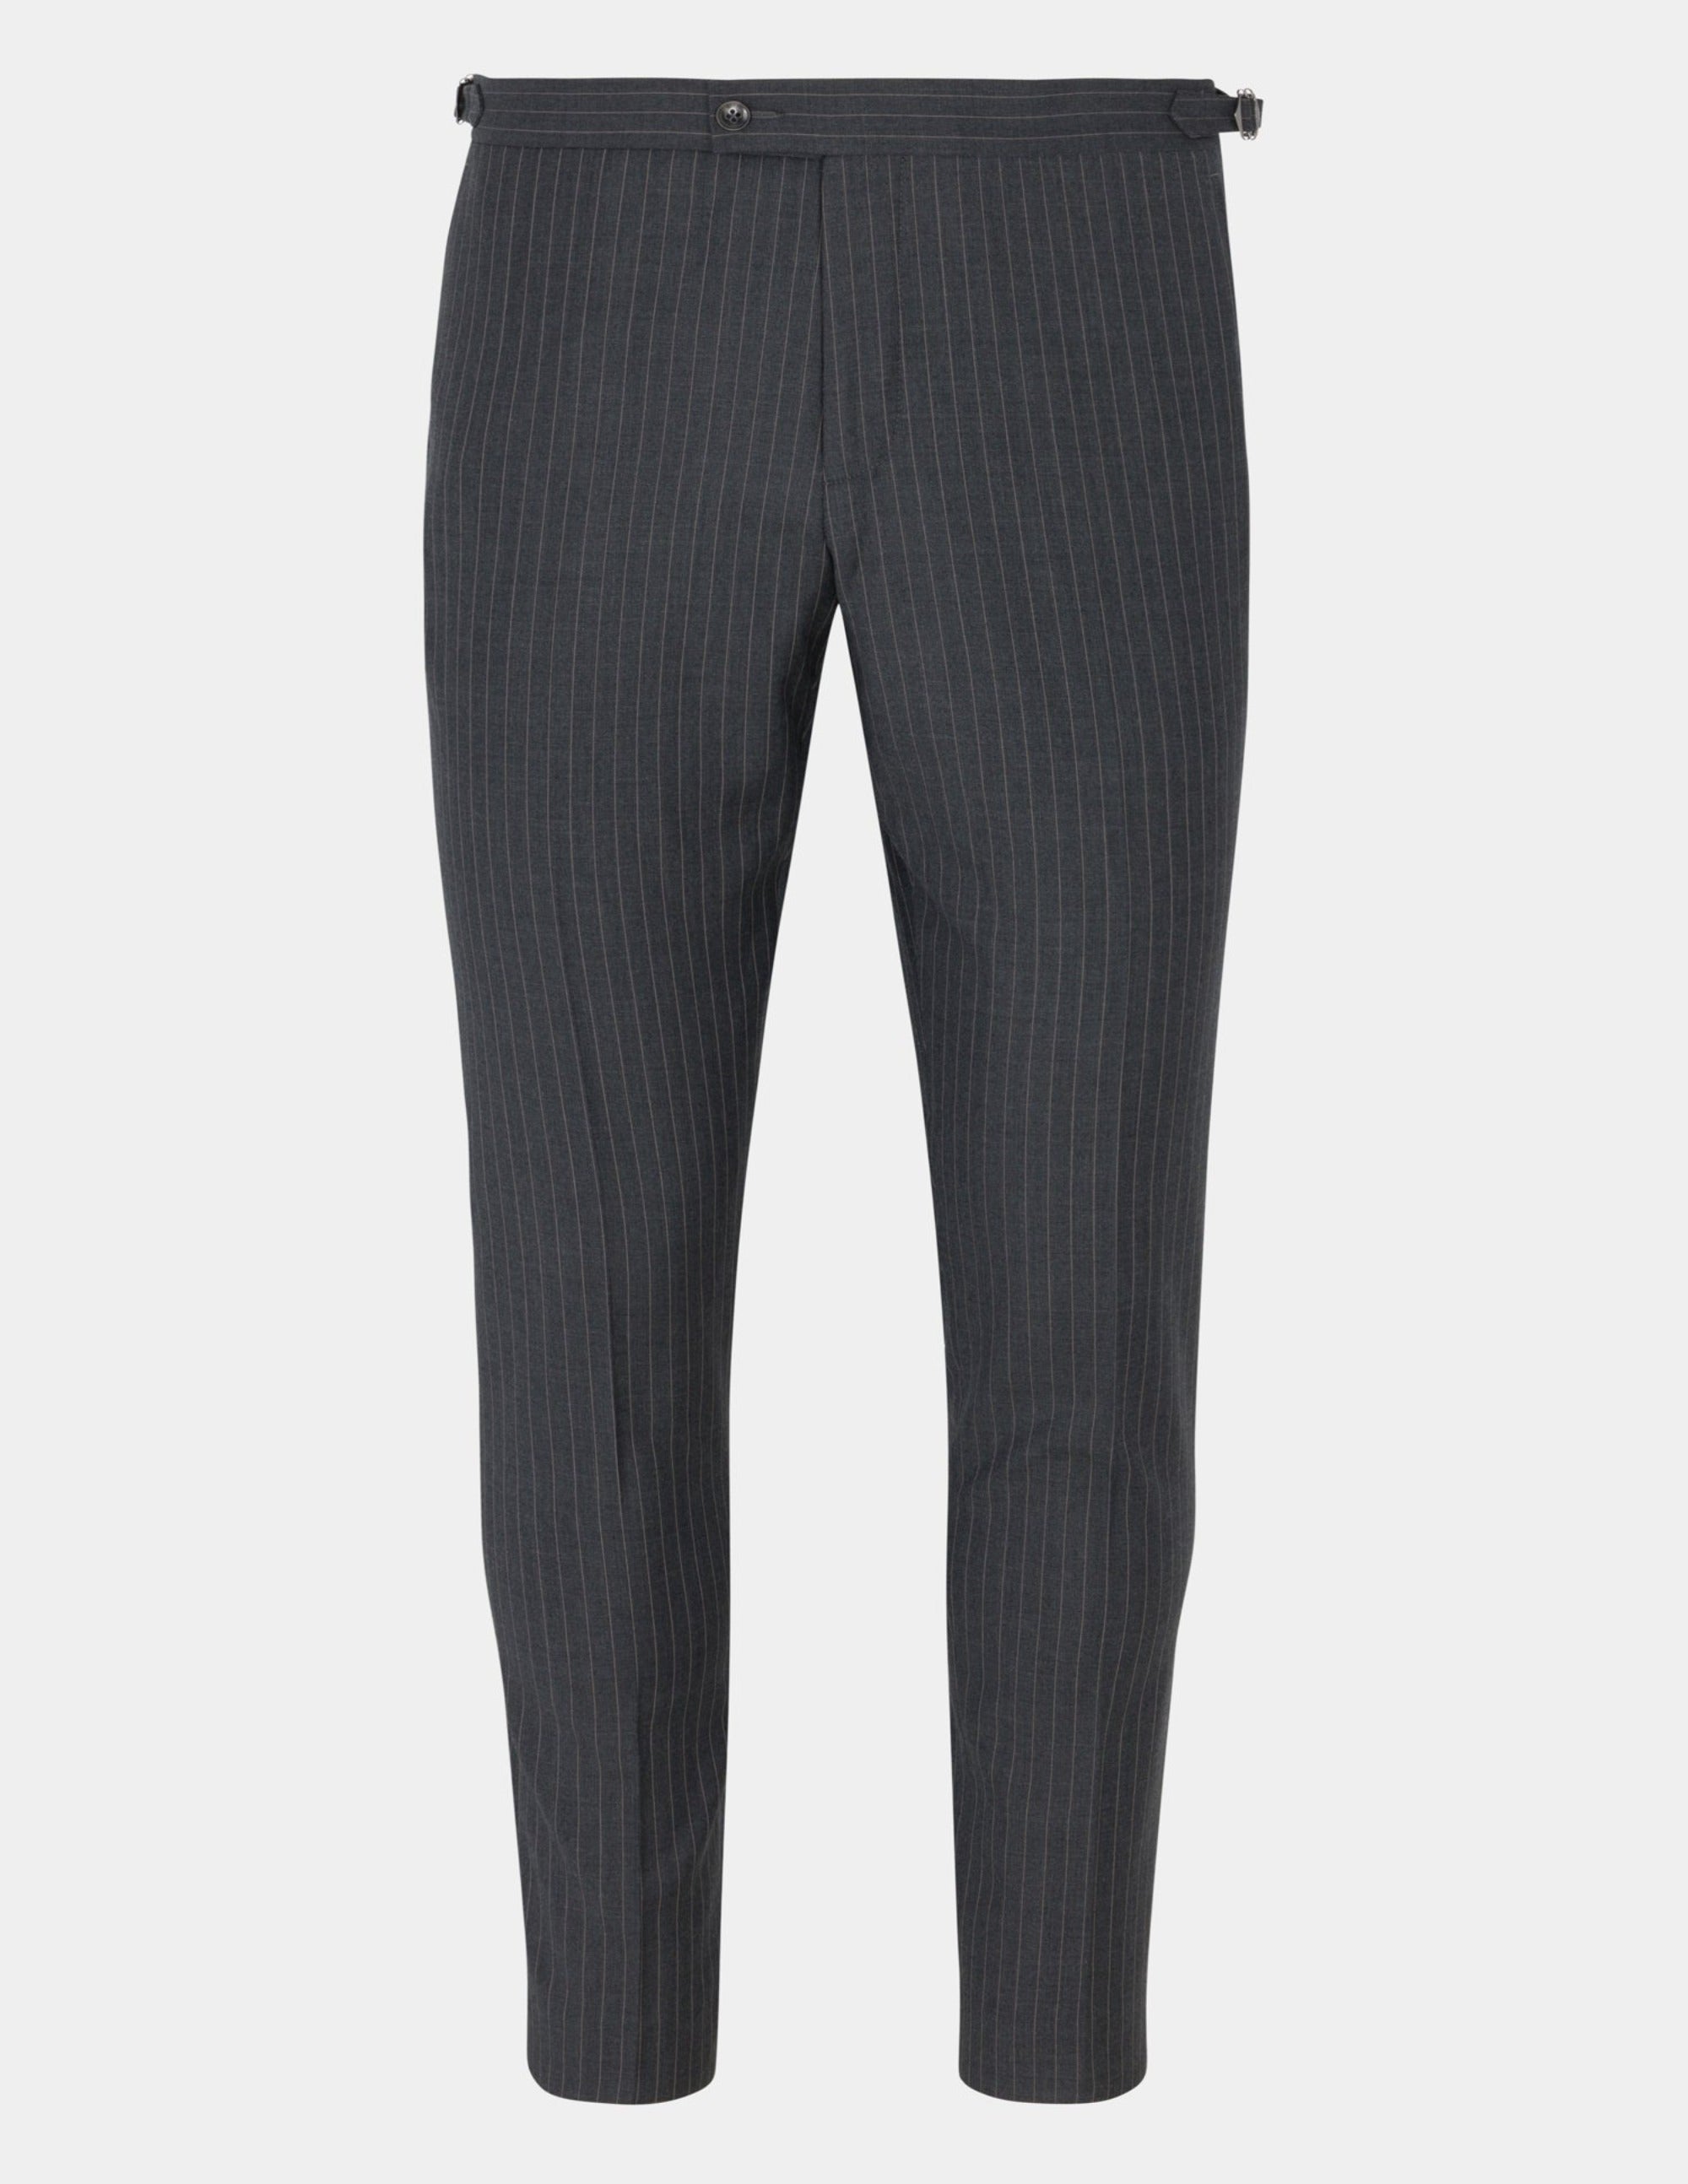 Grey White Stripes Wool Double Breasted Suit - Samir Bachkami